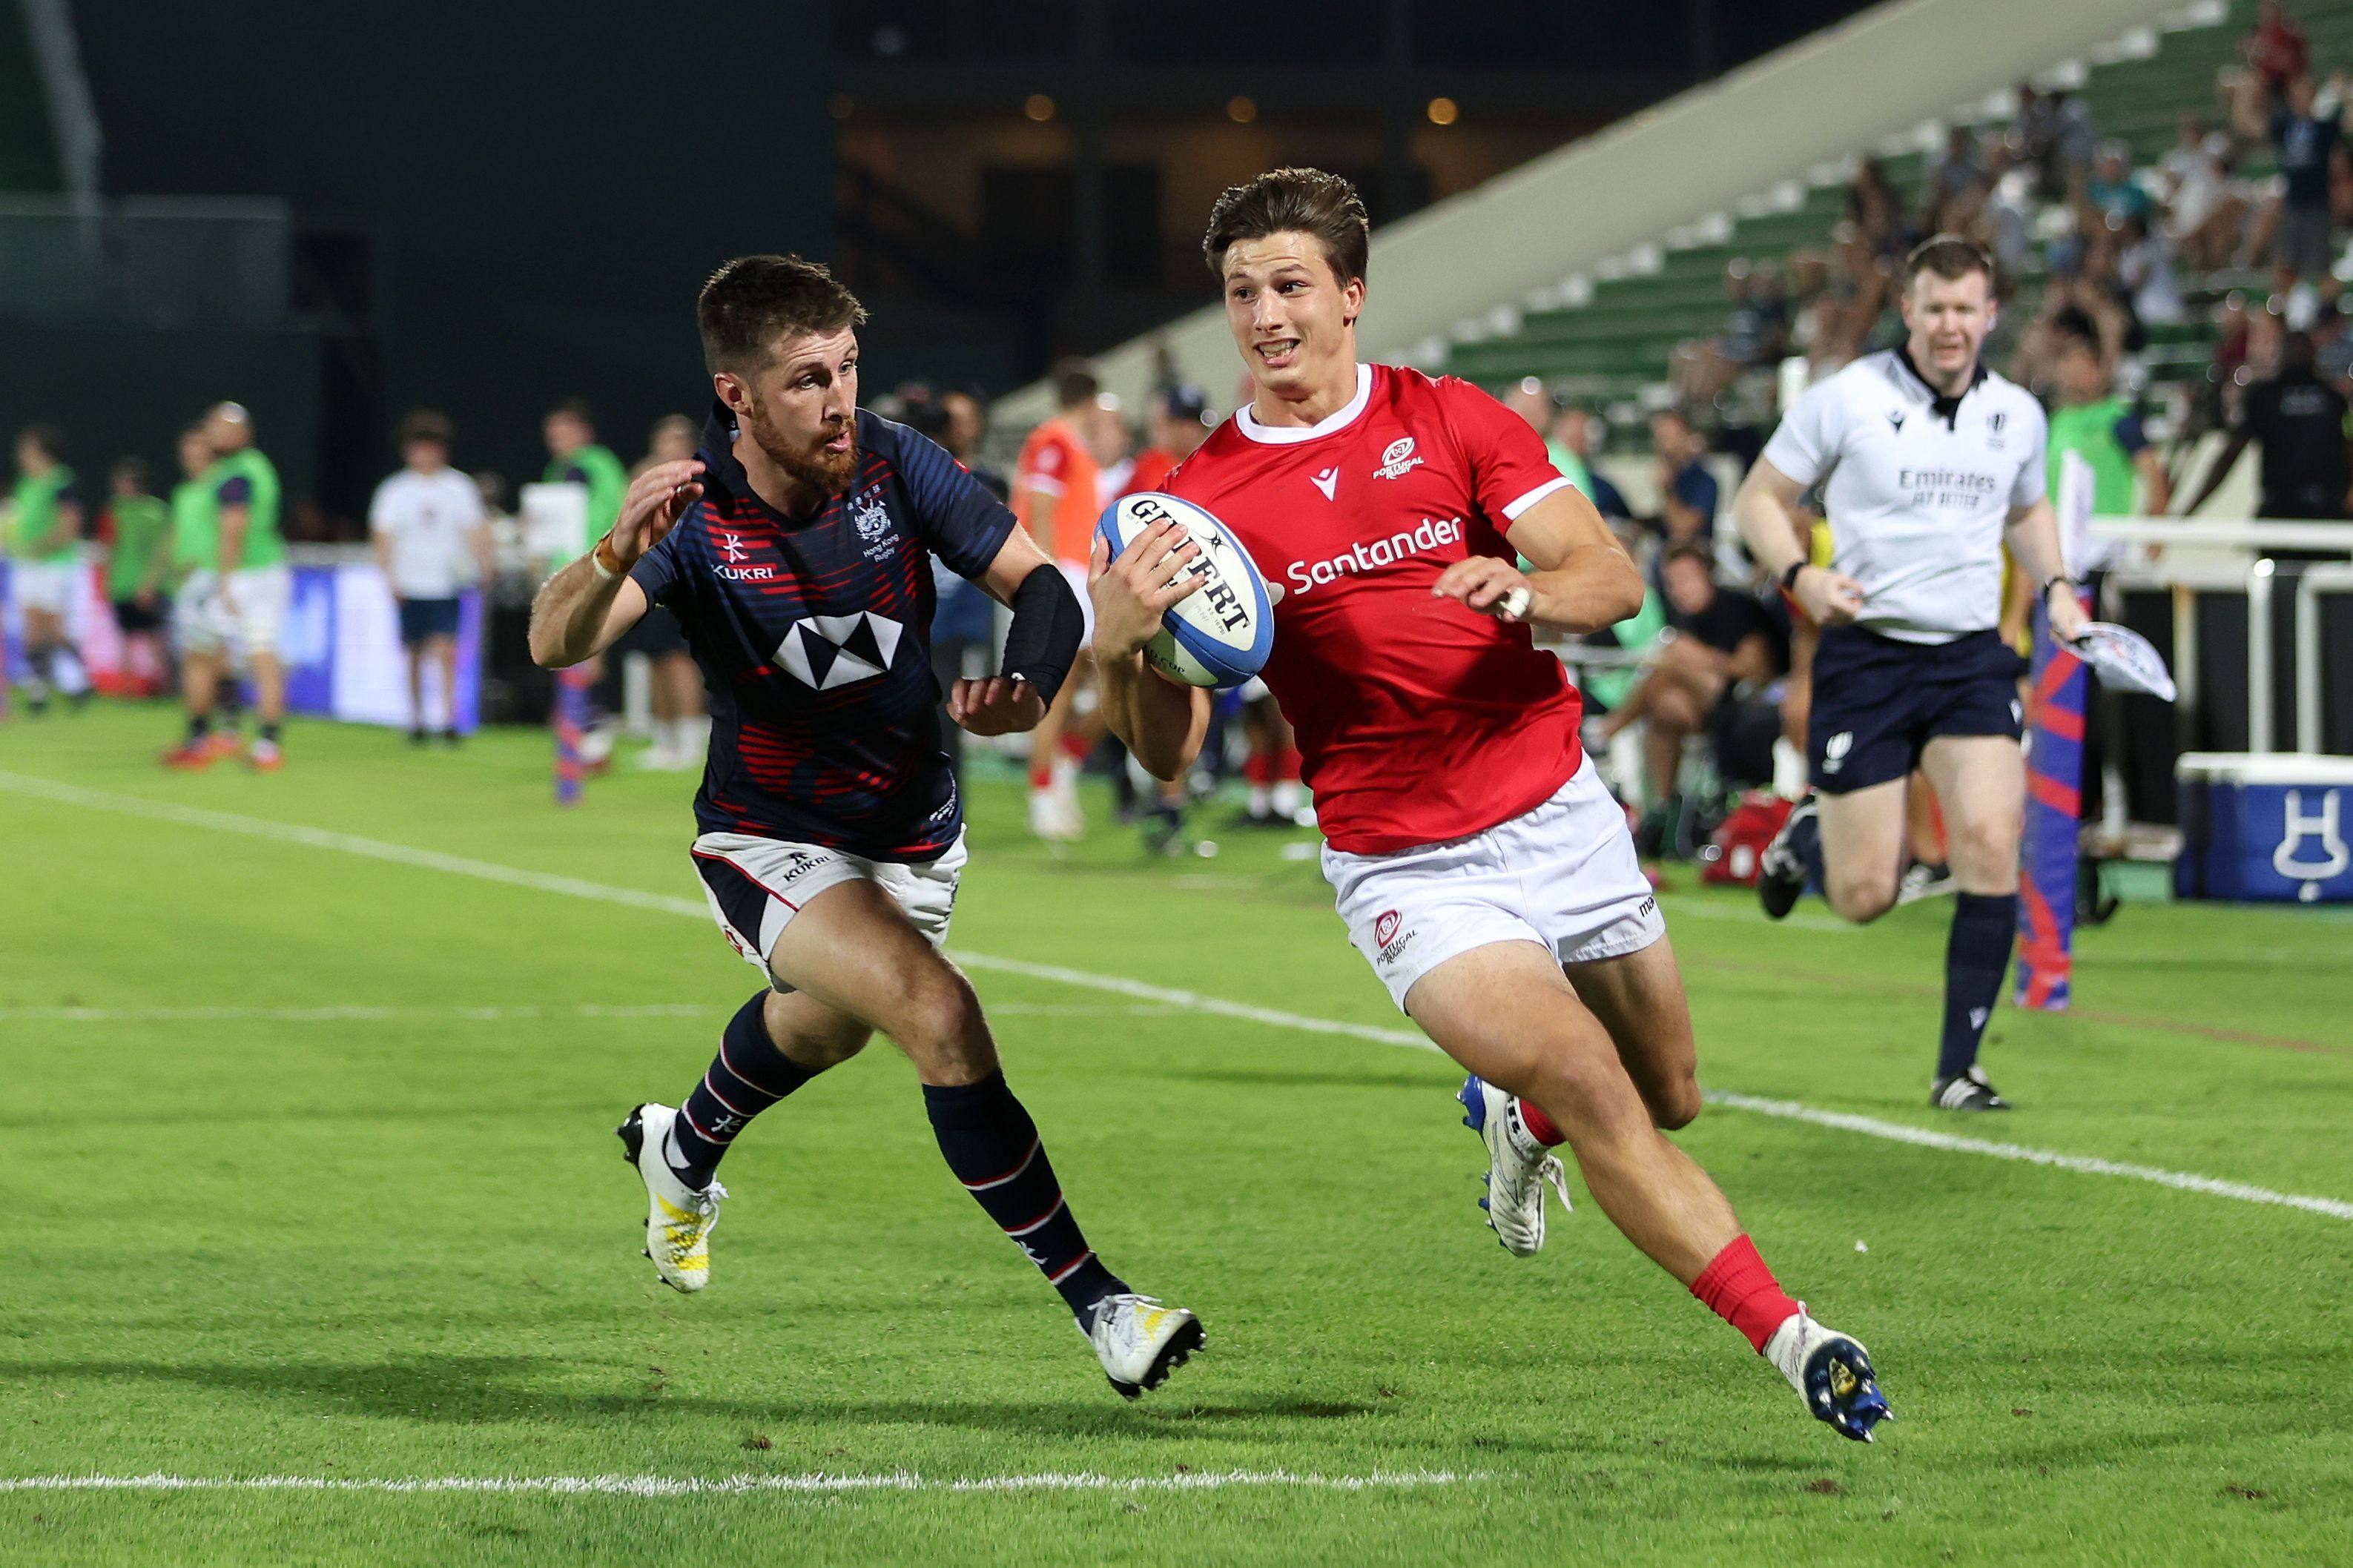 Rodrigo Marta of Portugal scores the side’s fourth try against Hong Kong in Dubai. Photo: Getty Images